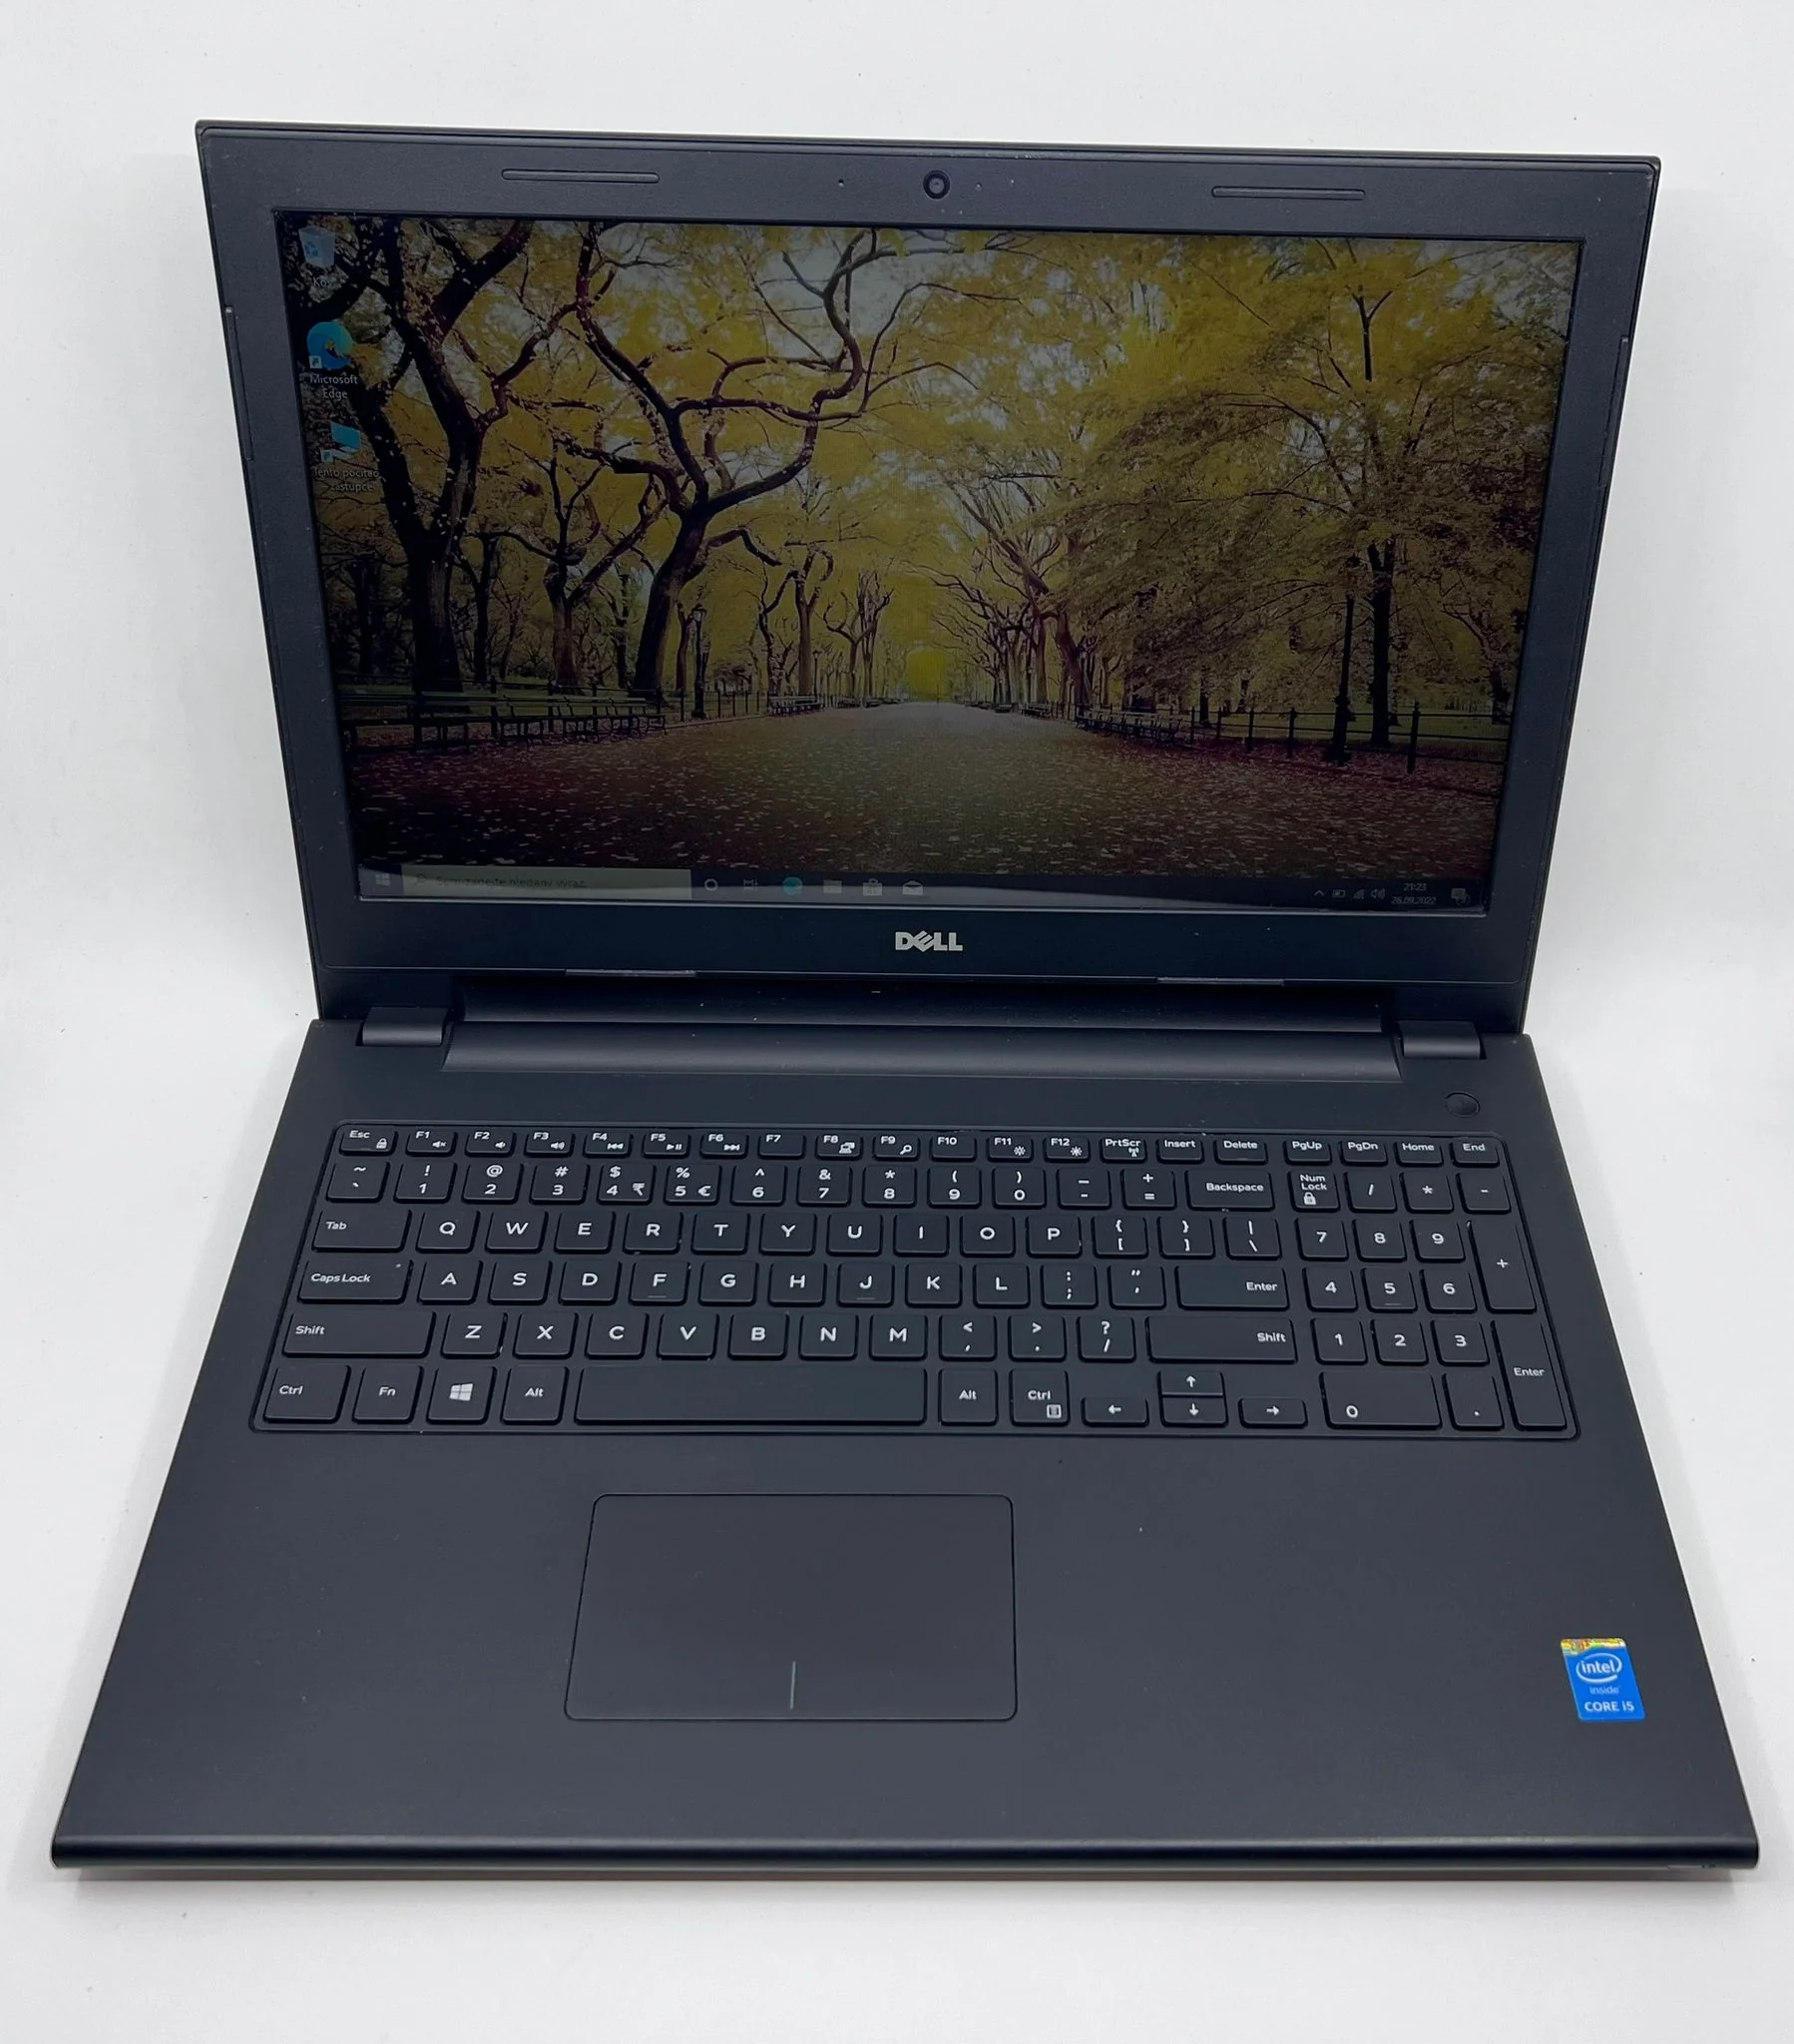 Dell Inspiron 15 3878 Notebook